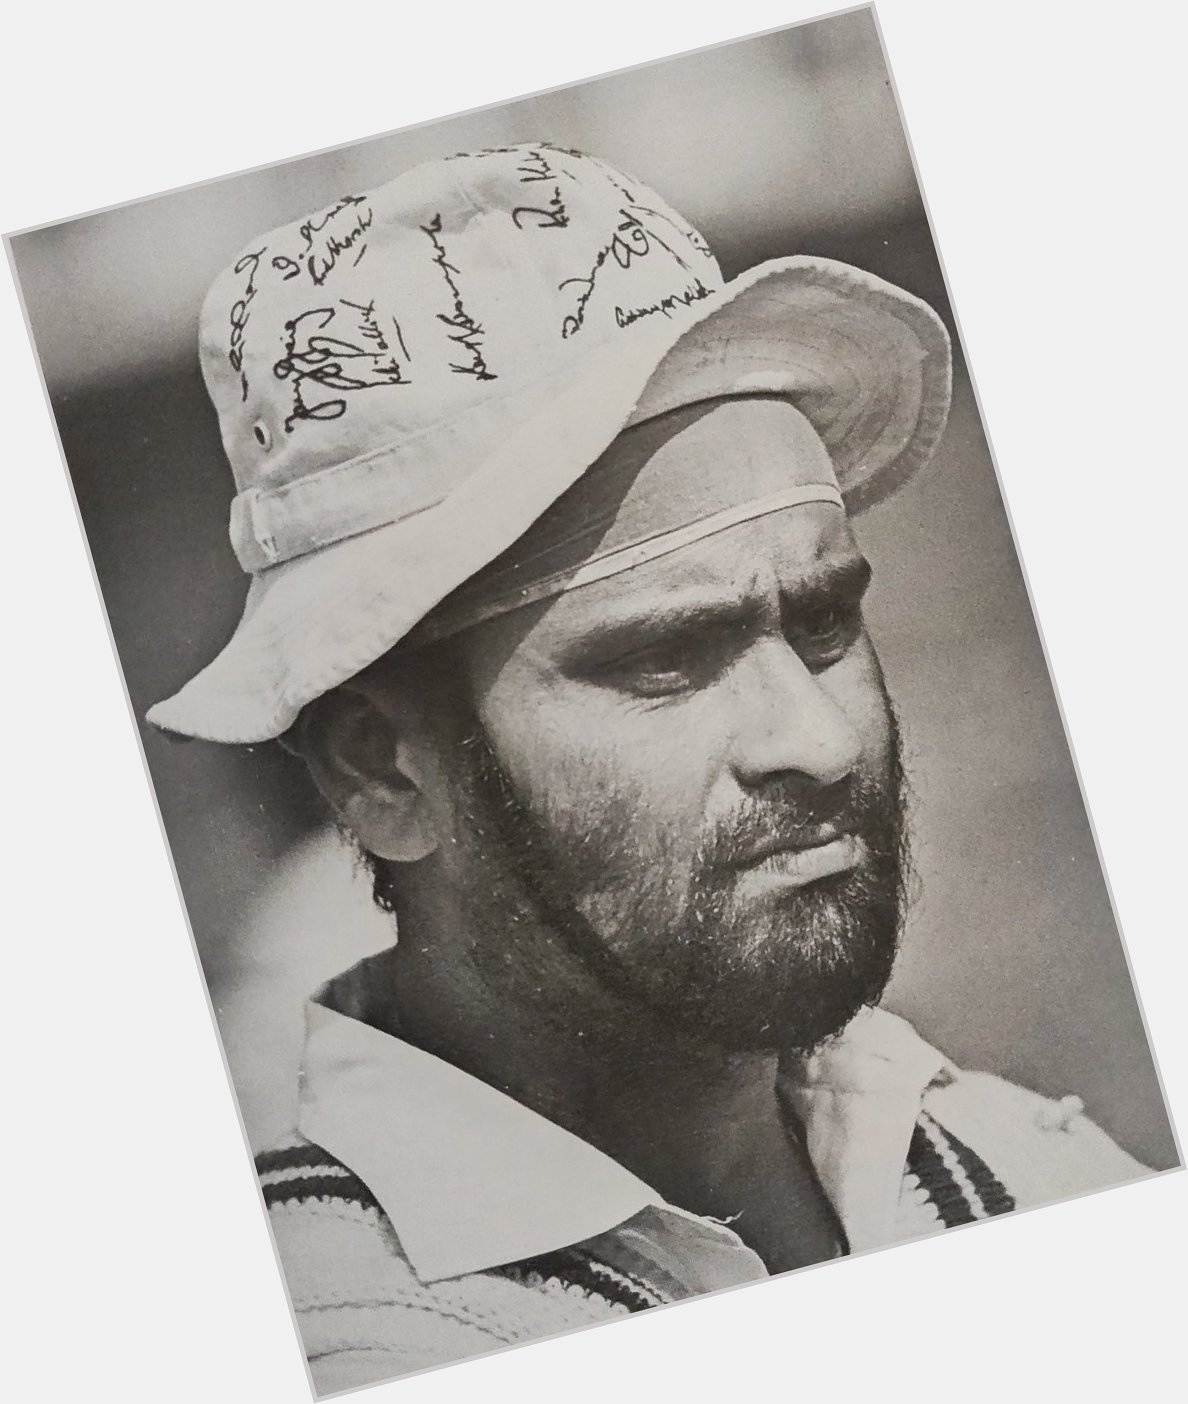  Happy Birthday to former India captain Bishan Singh Bedi, who turns 74 today. 